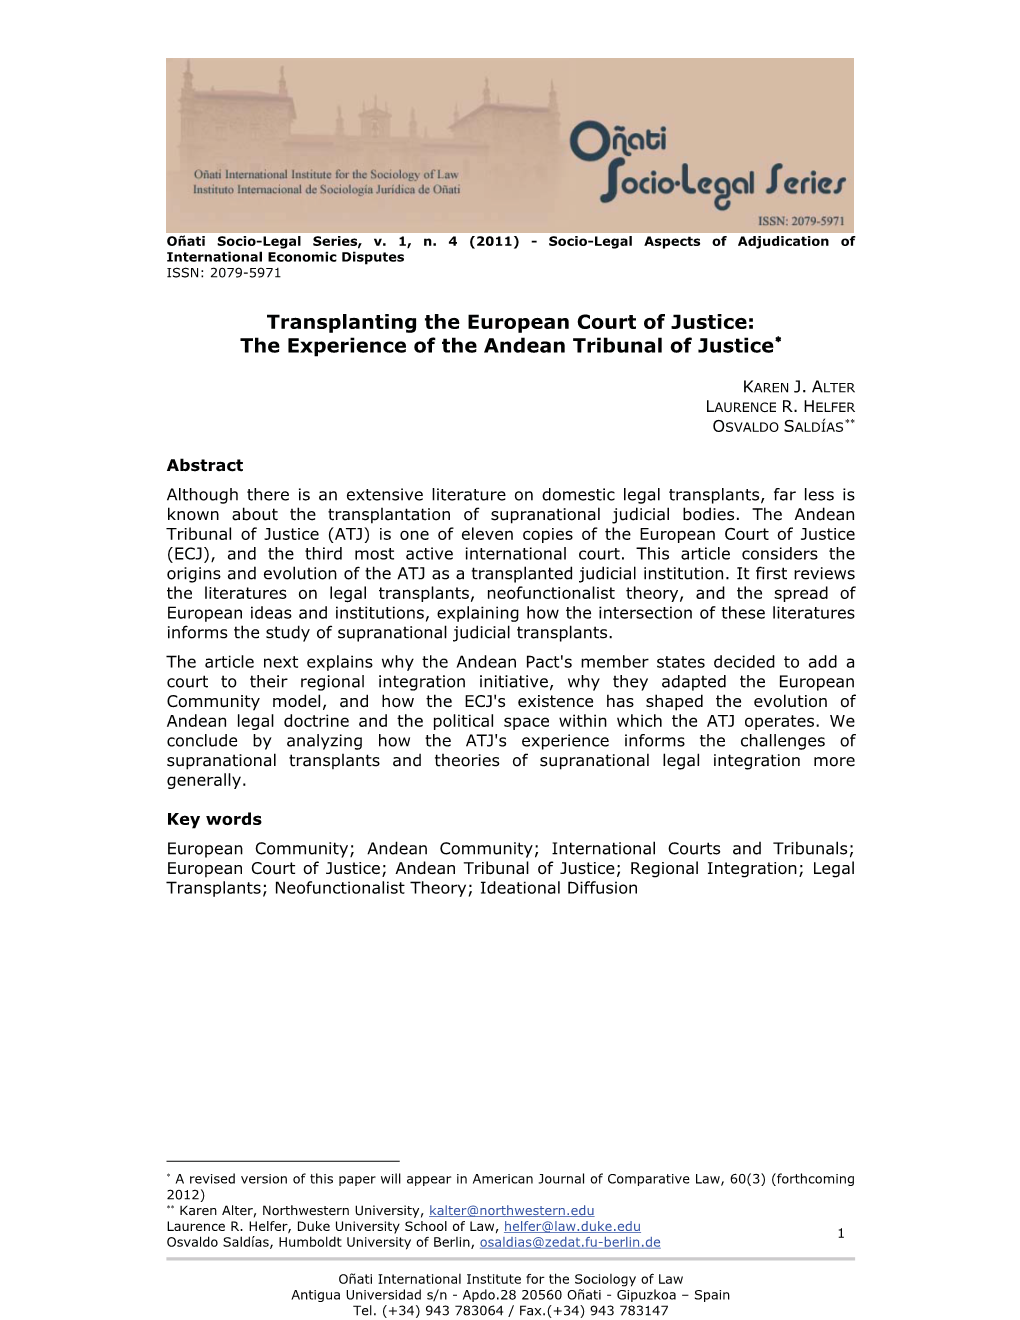 Transplanting the European Court of Justice: the Experience of the Andean Tribunal of Justice